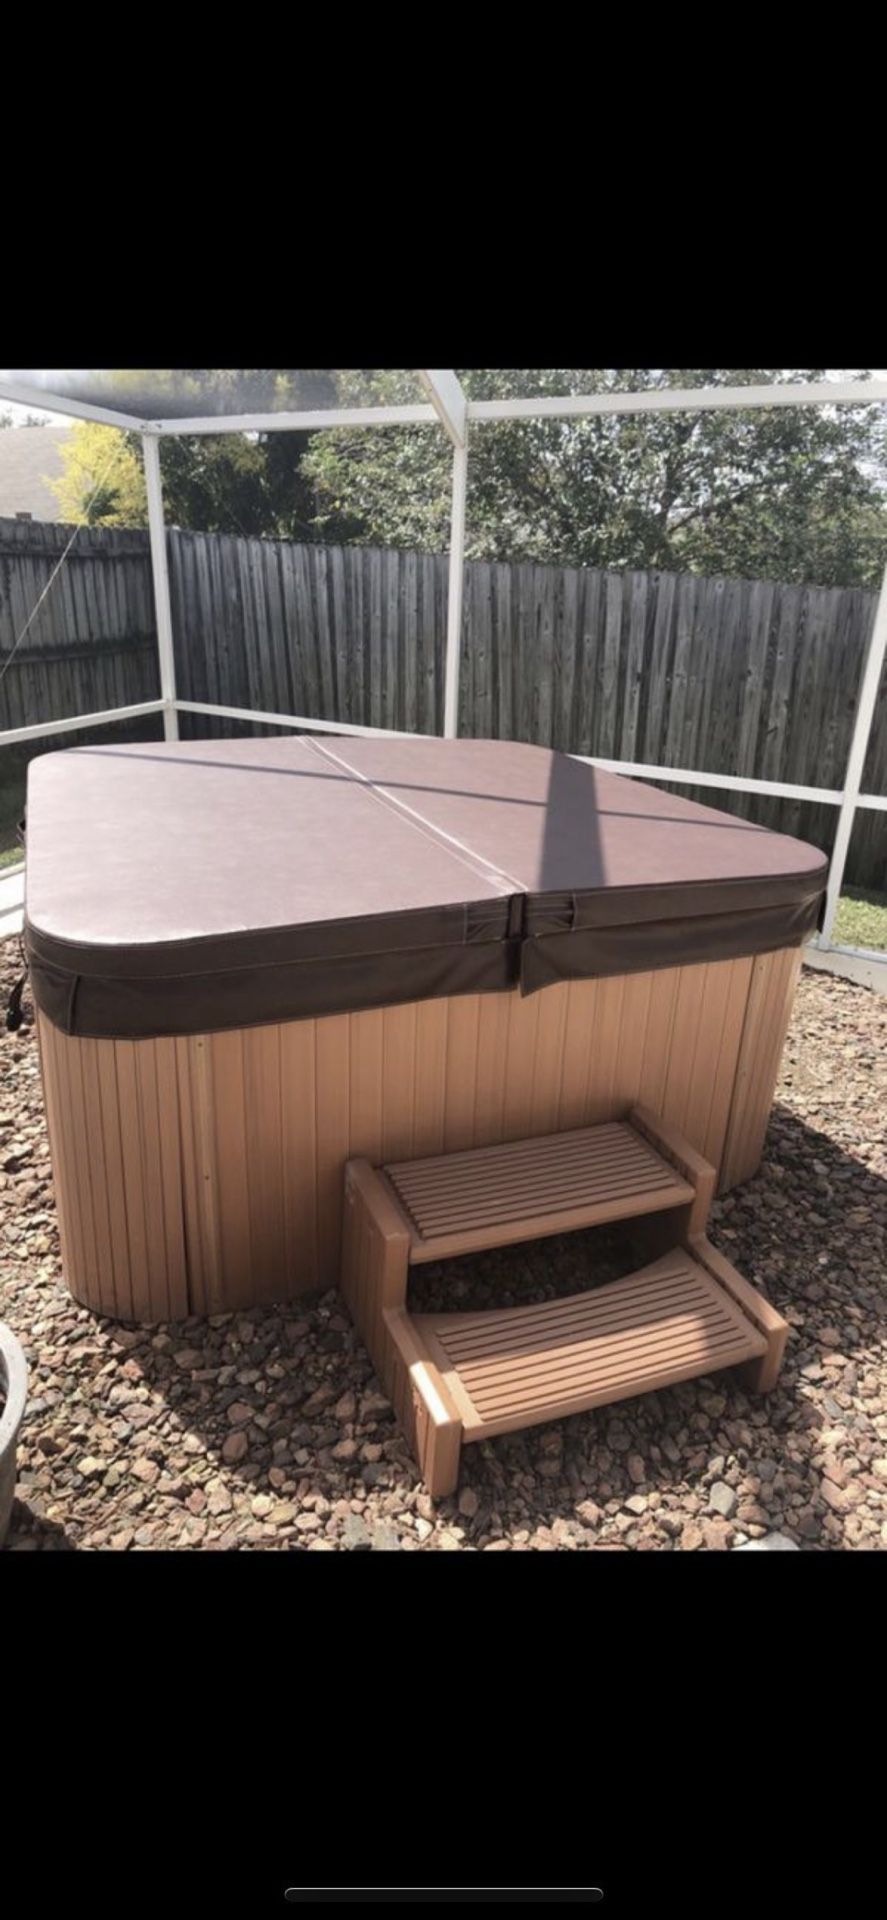 BRAND NEW HOT TUB COVER